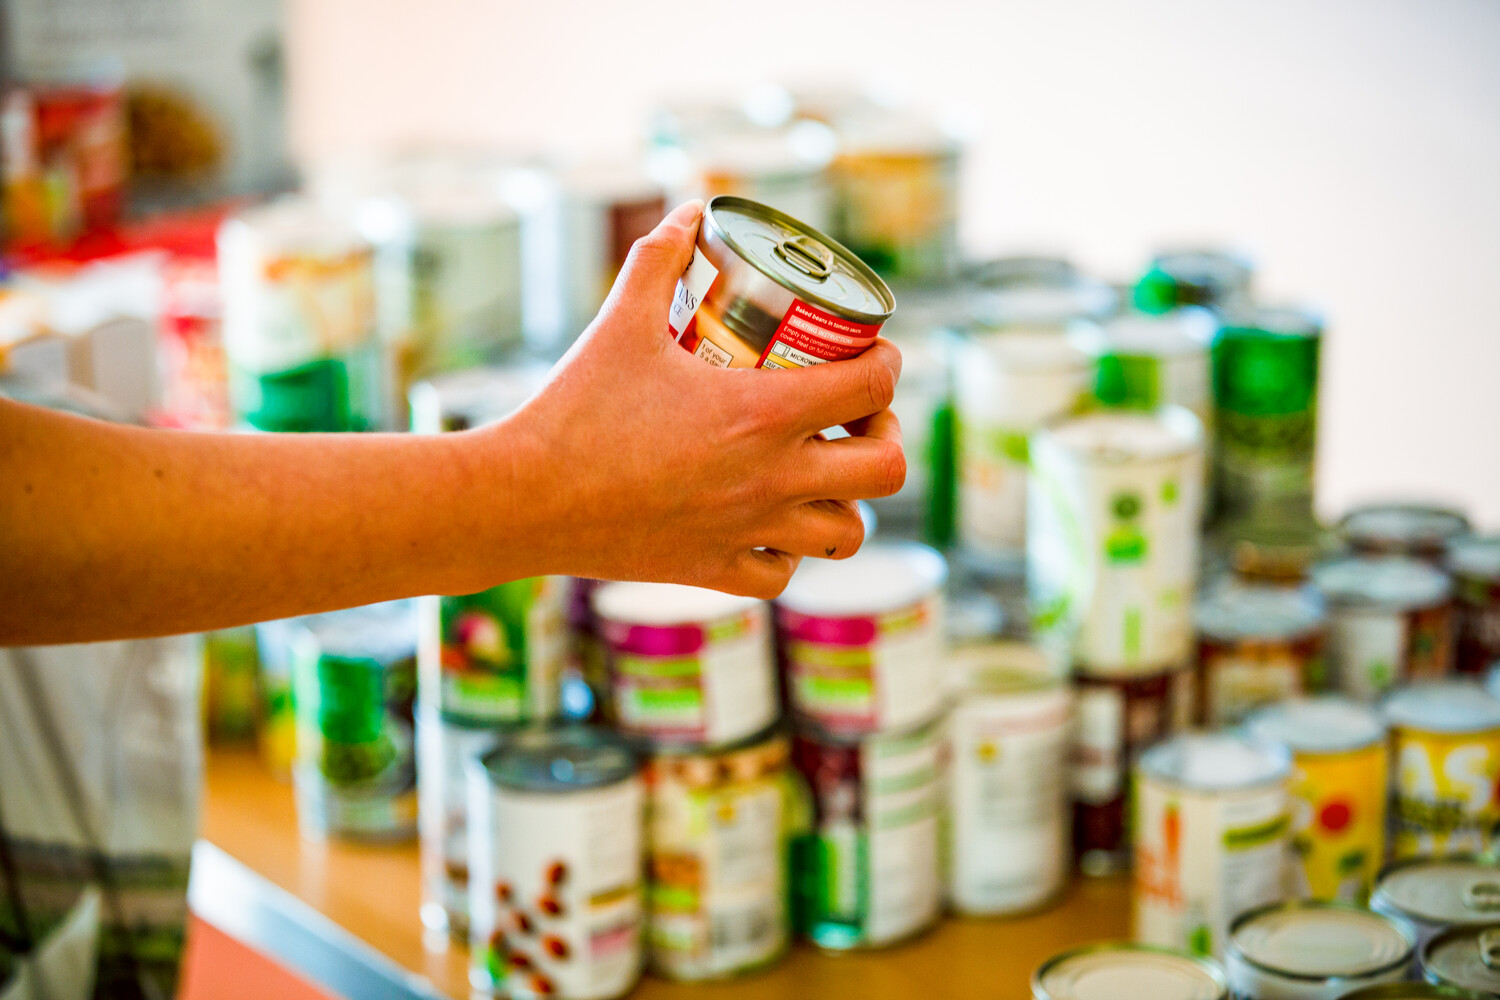 A hand holds a tinned food item. There are more tinned food items in the background.